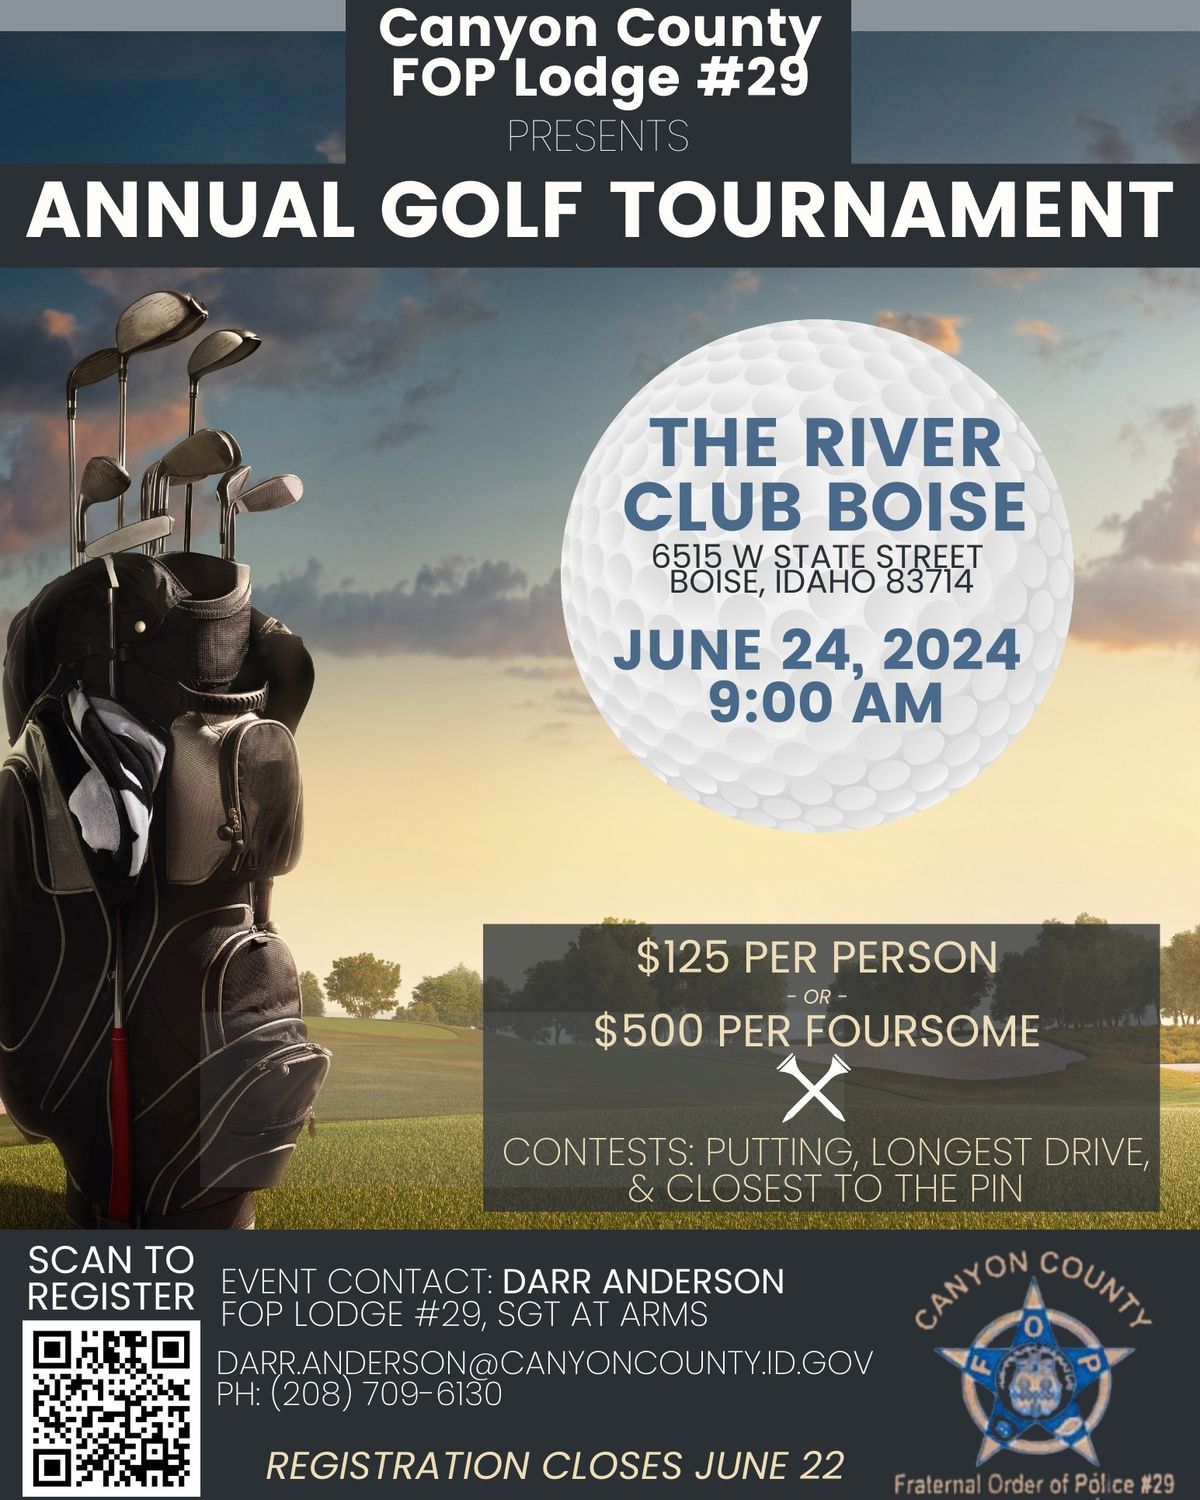 Canyon County Fraternal Order of Police is hosting its annual golf tournament on June 24